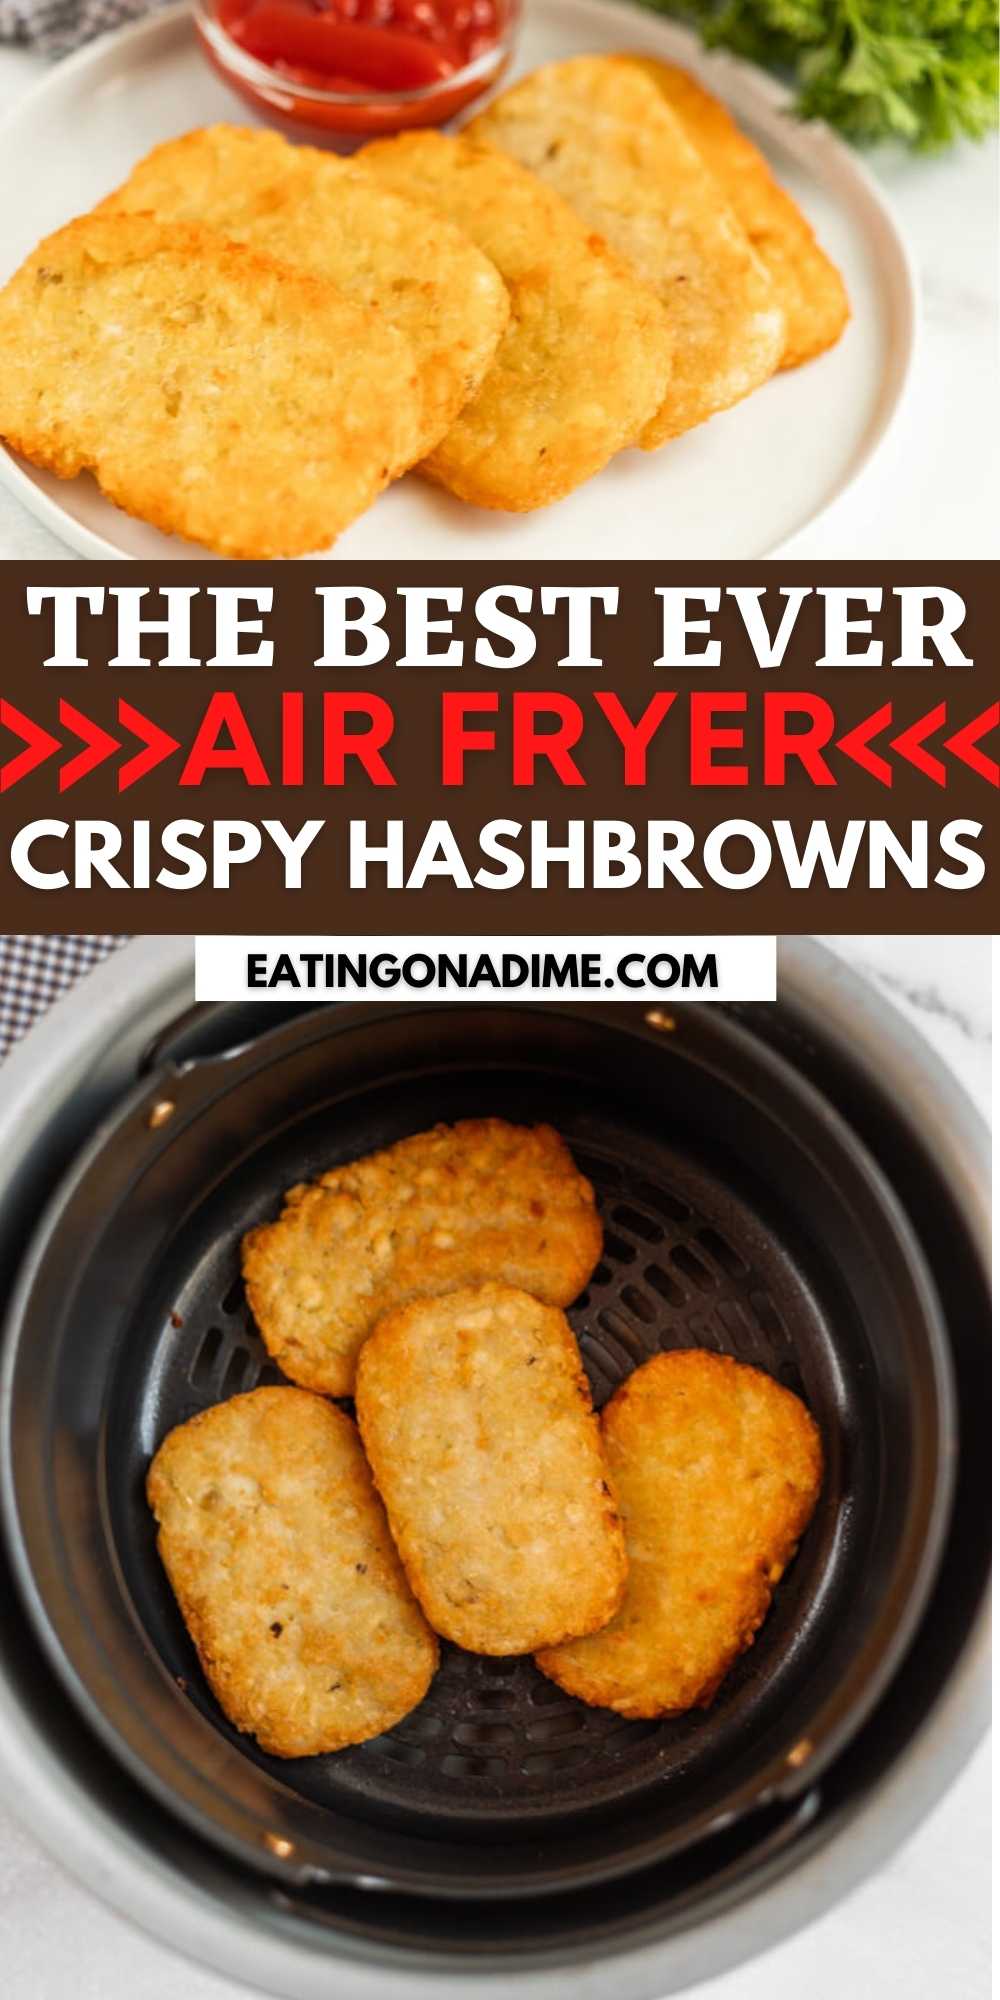 Crispy and delicious air fryer hashbrowns recipe is the perfect side to pair with breakfast. Enjoy patty hashbrowns in the air fryer in minutes from frozen.  These taste just like the ones from a restaurant!  #eatingonadime #airfryerrecipes #hashbrownsrecipes #breakfastrecipes 
